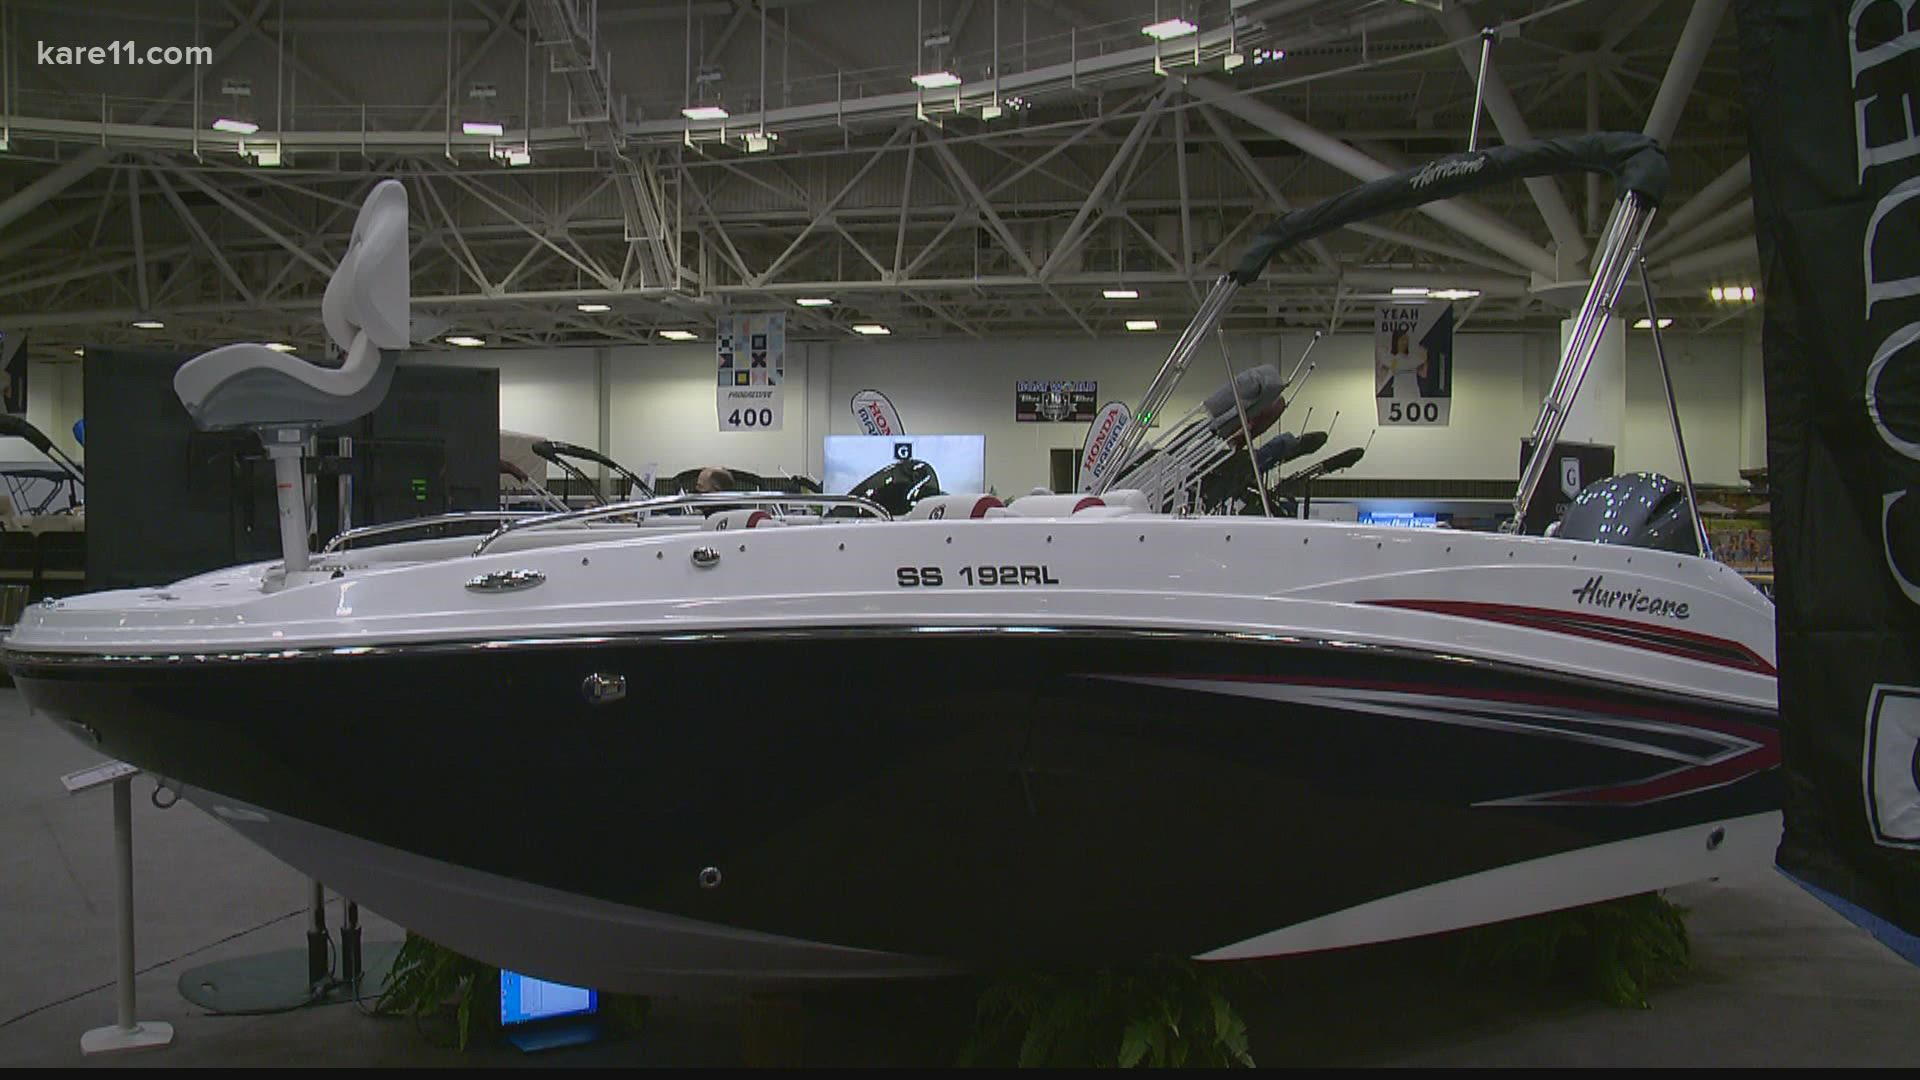 The Minneapolis Boat Show runs Jan. 20-23. Dealers encourage buyers to buy now to avoid shipping delays.